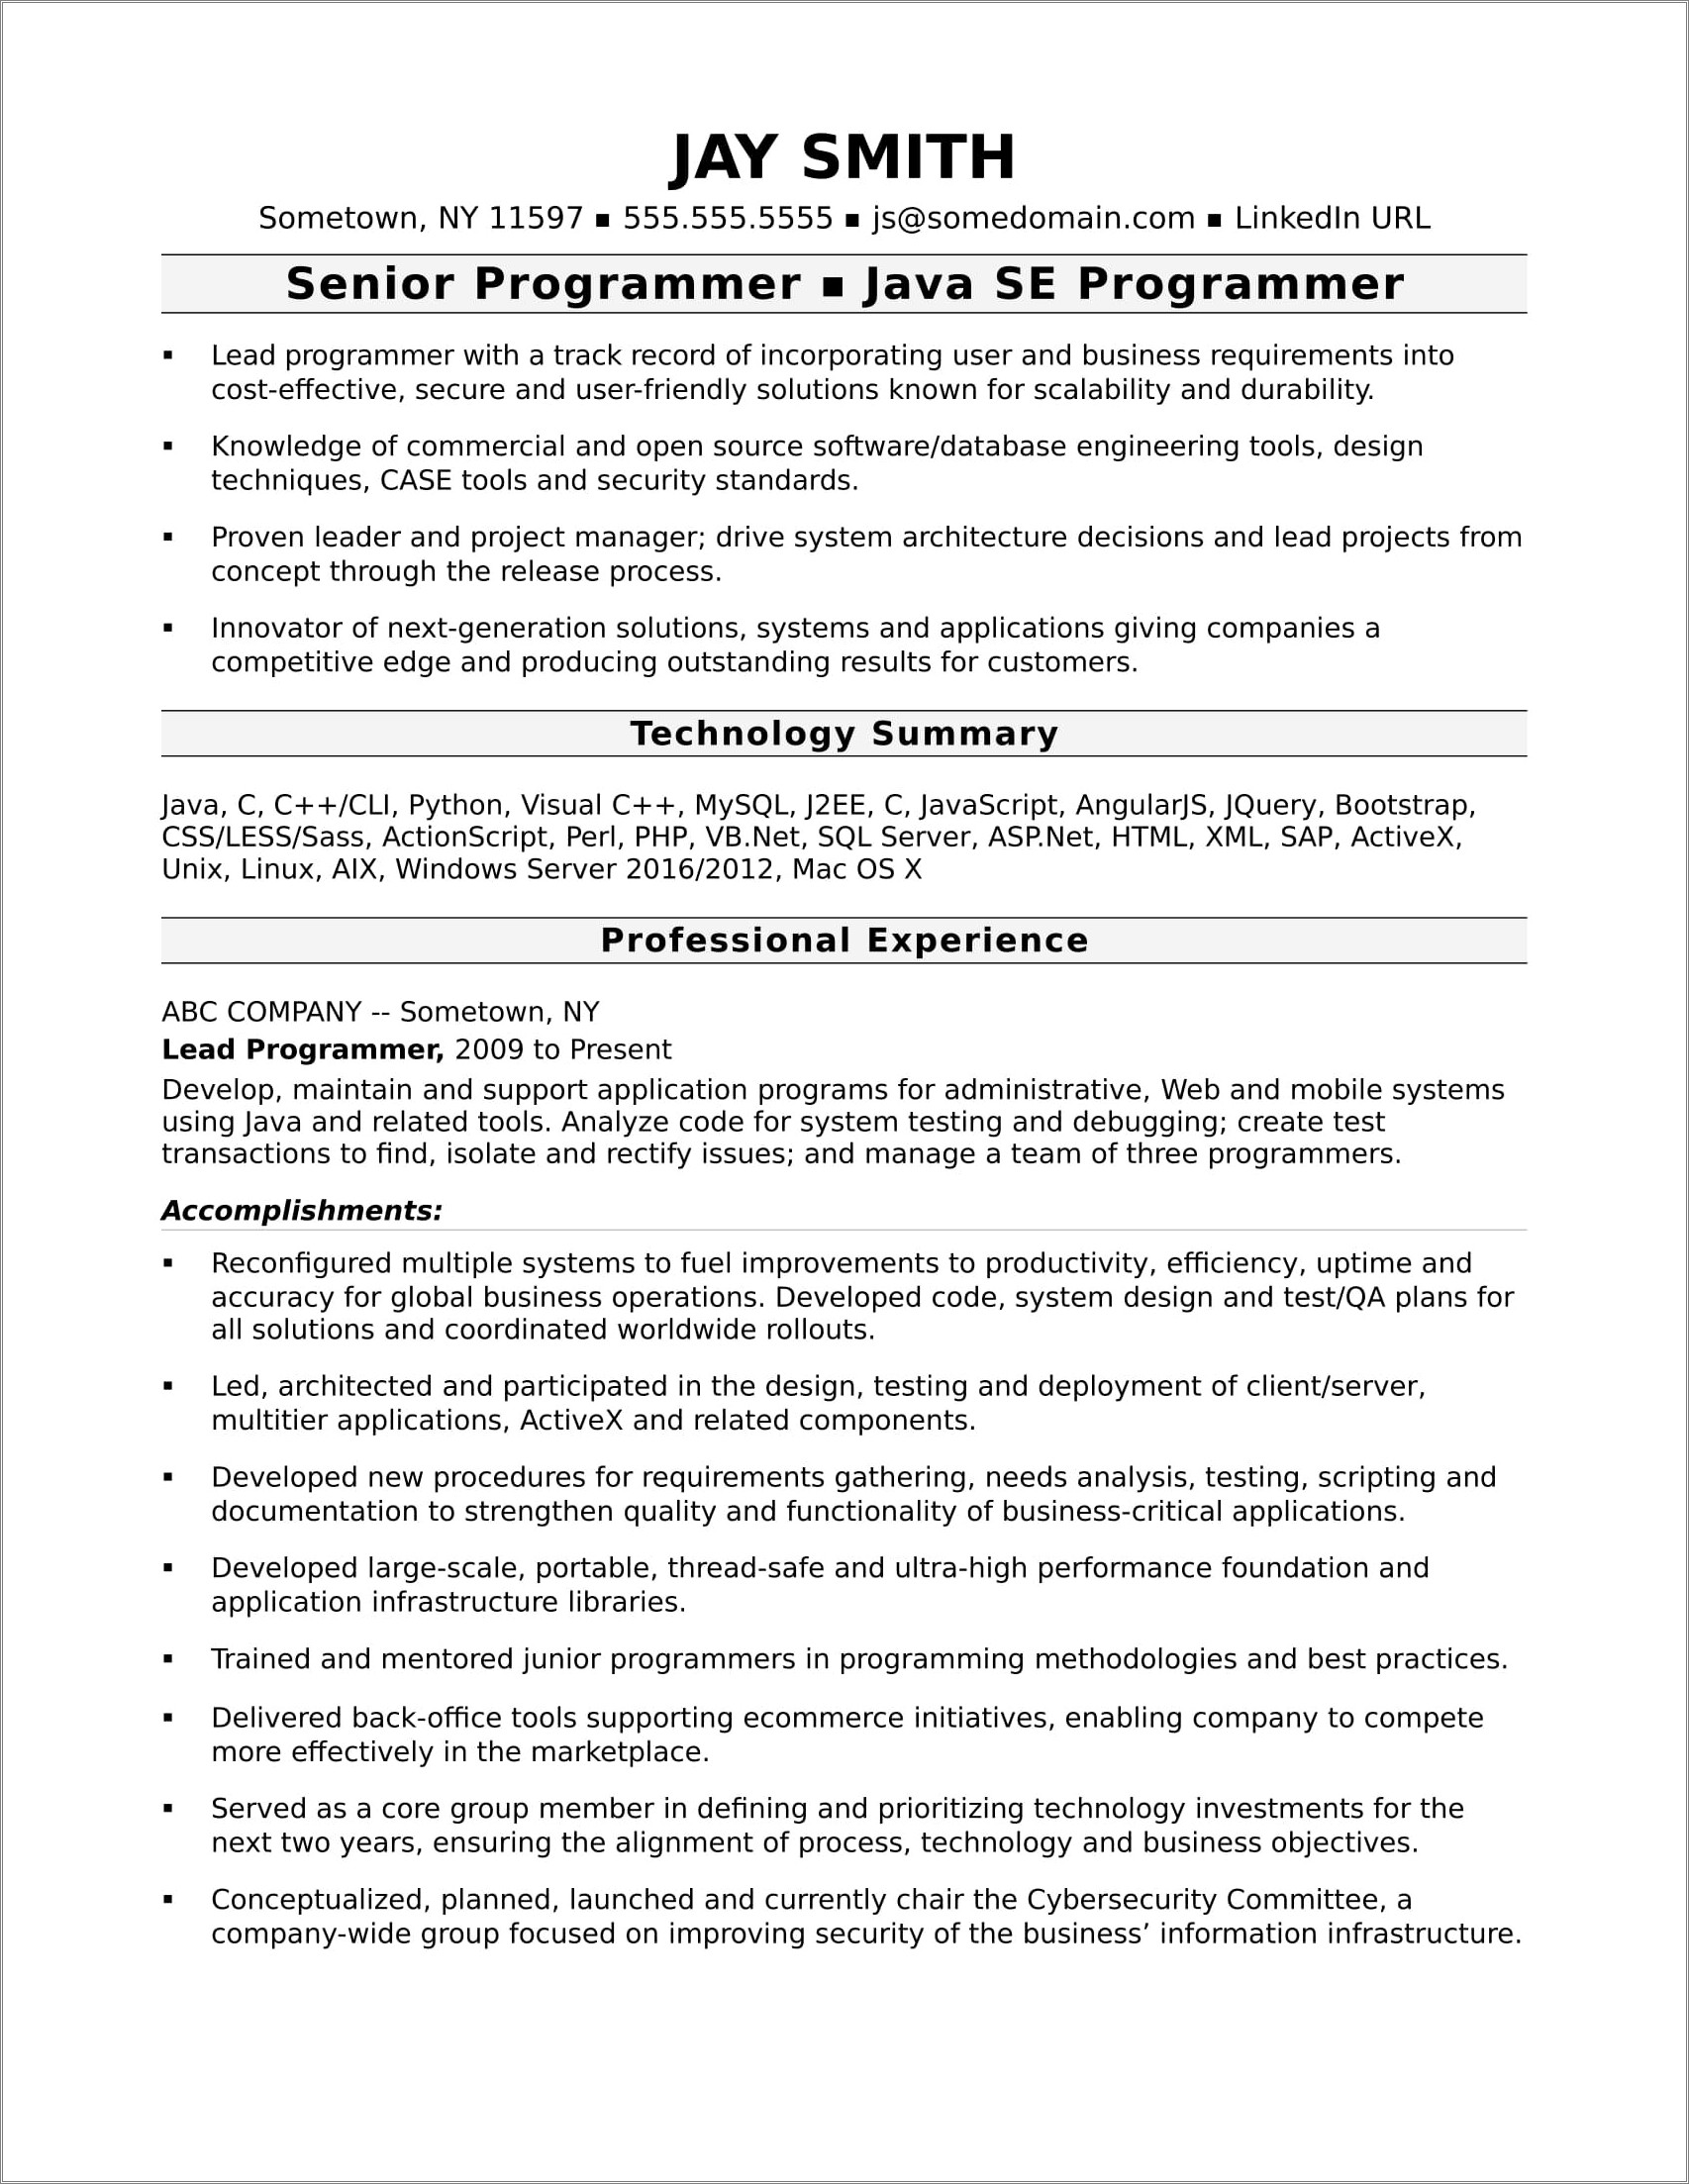 Compiling Work Experience On A Resume